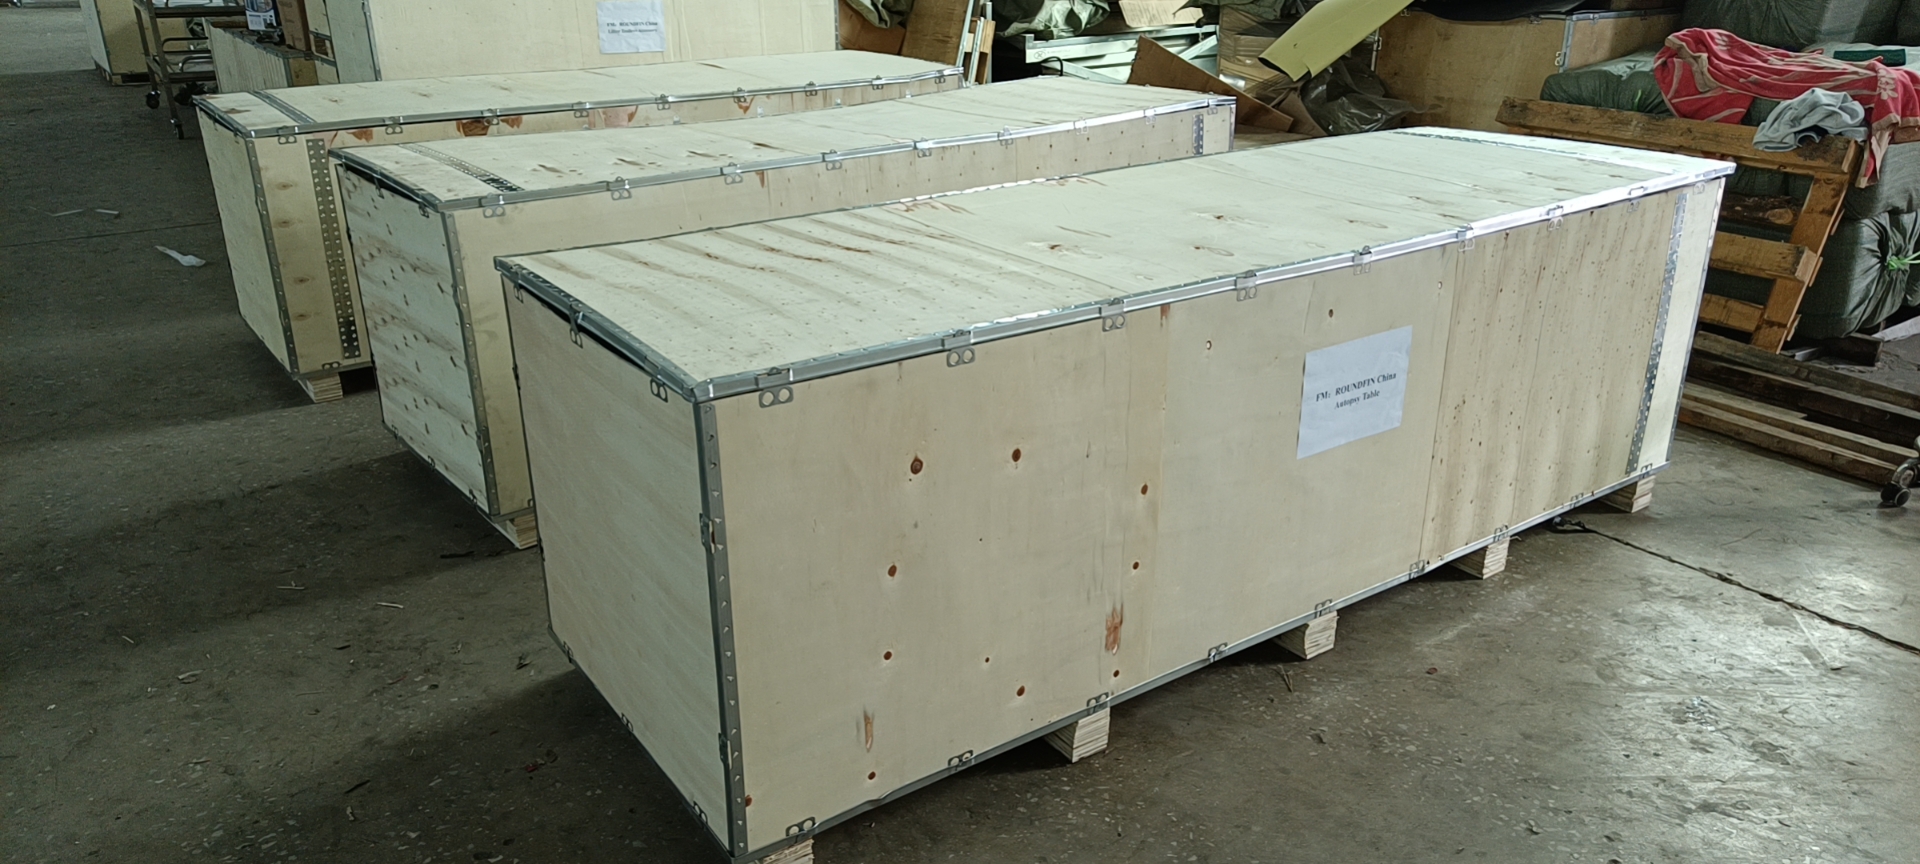 packing of morgue equipment